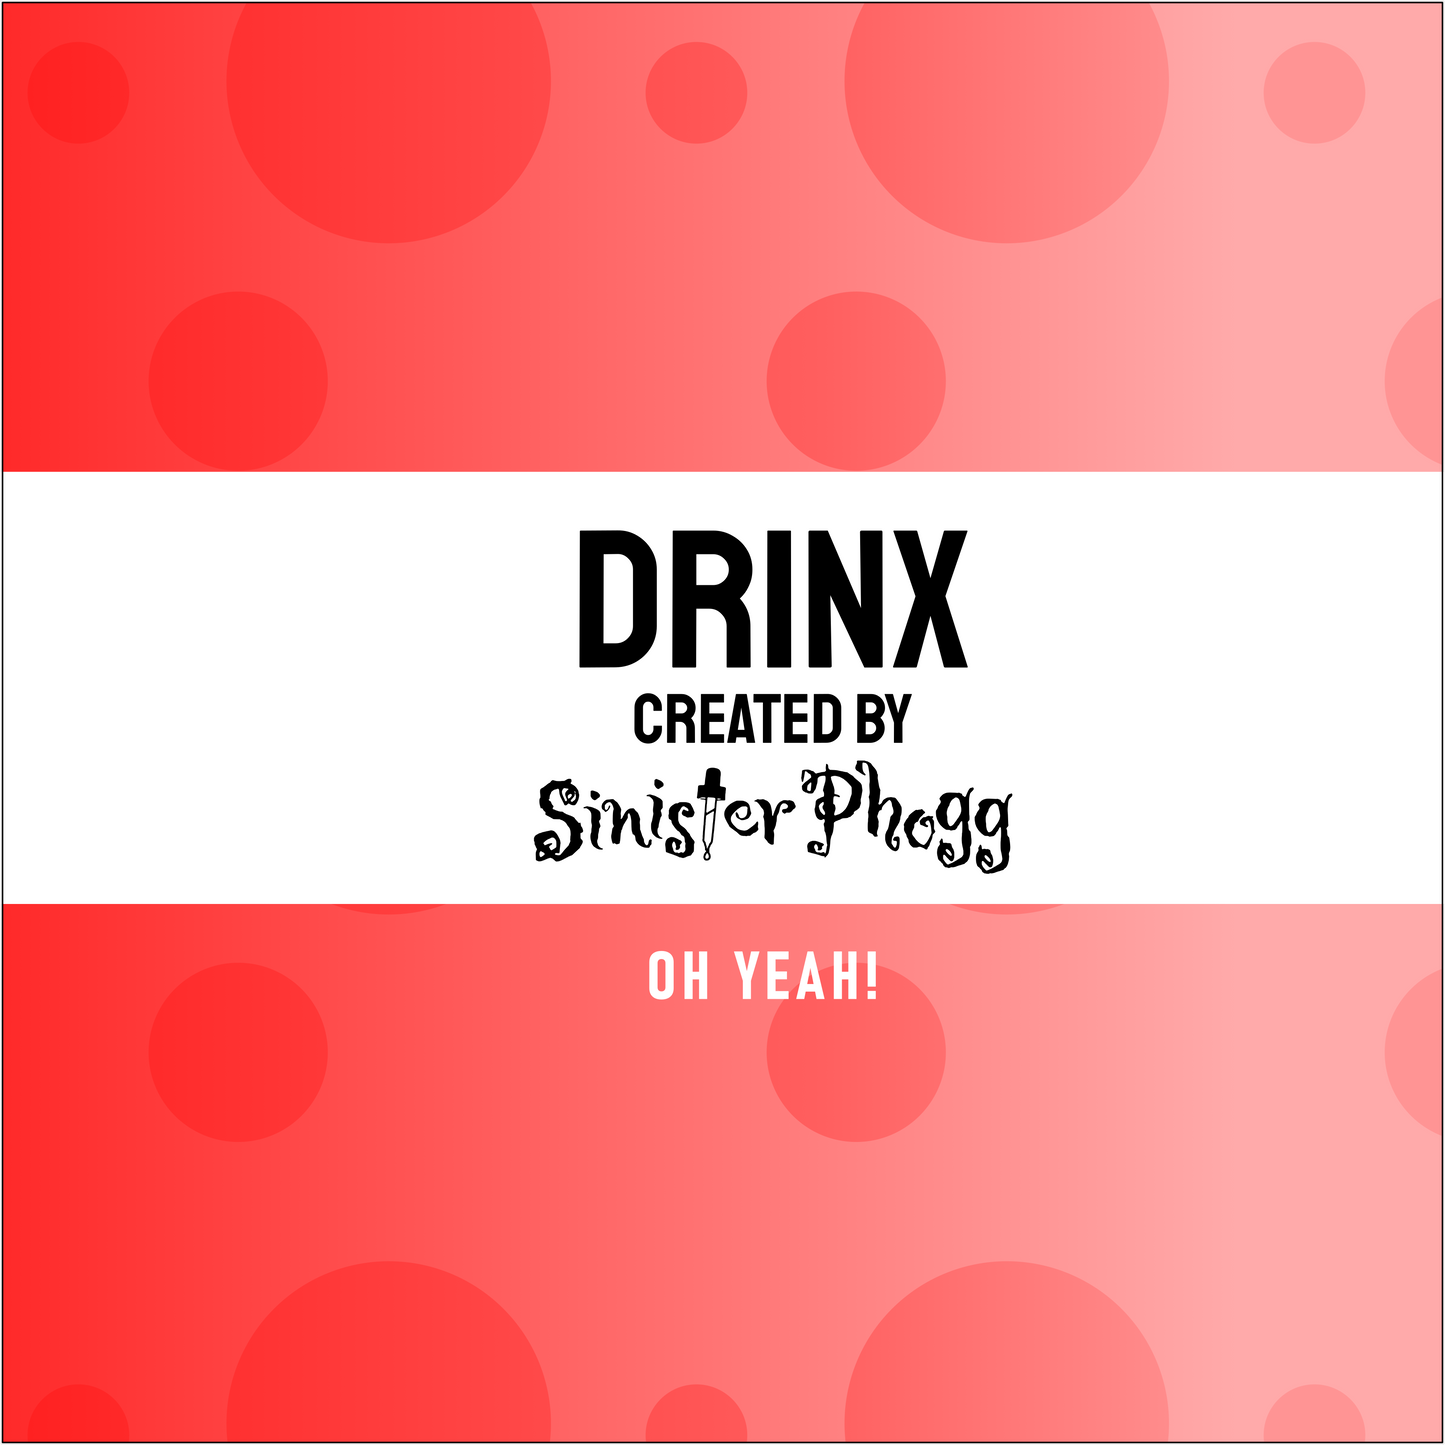 Oh Yeah - DRINX by Sinister Phogg